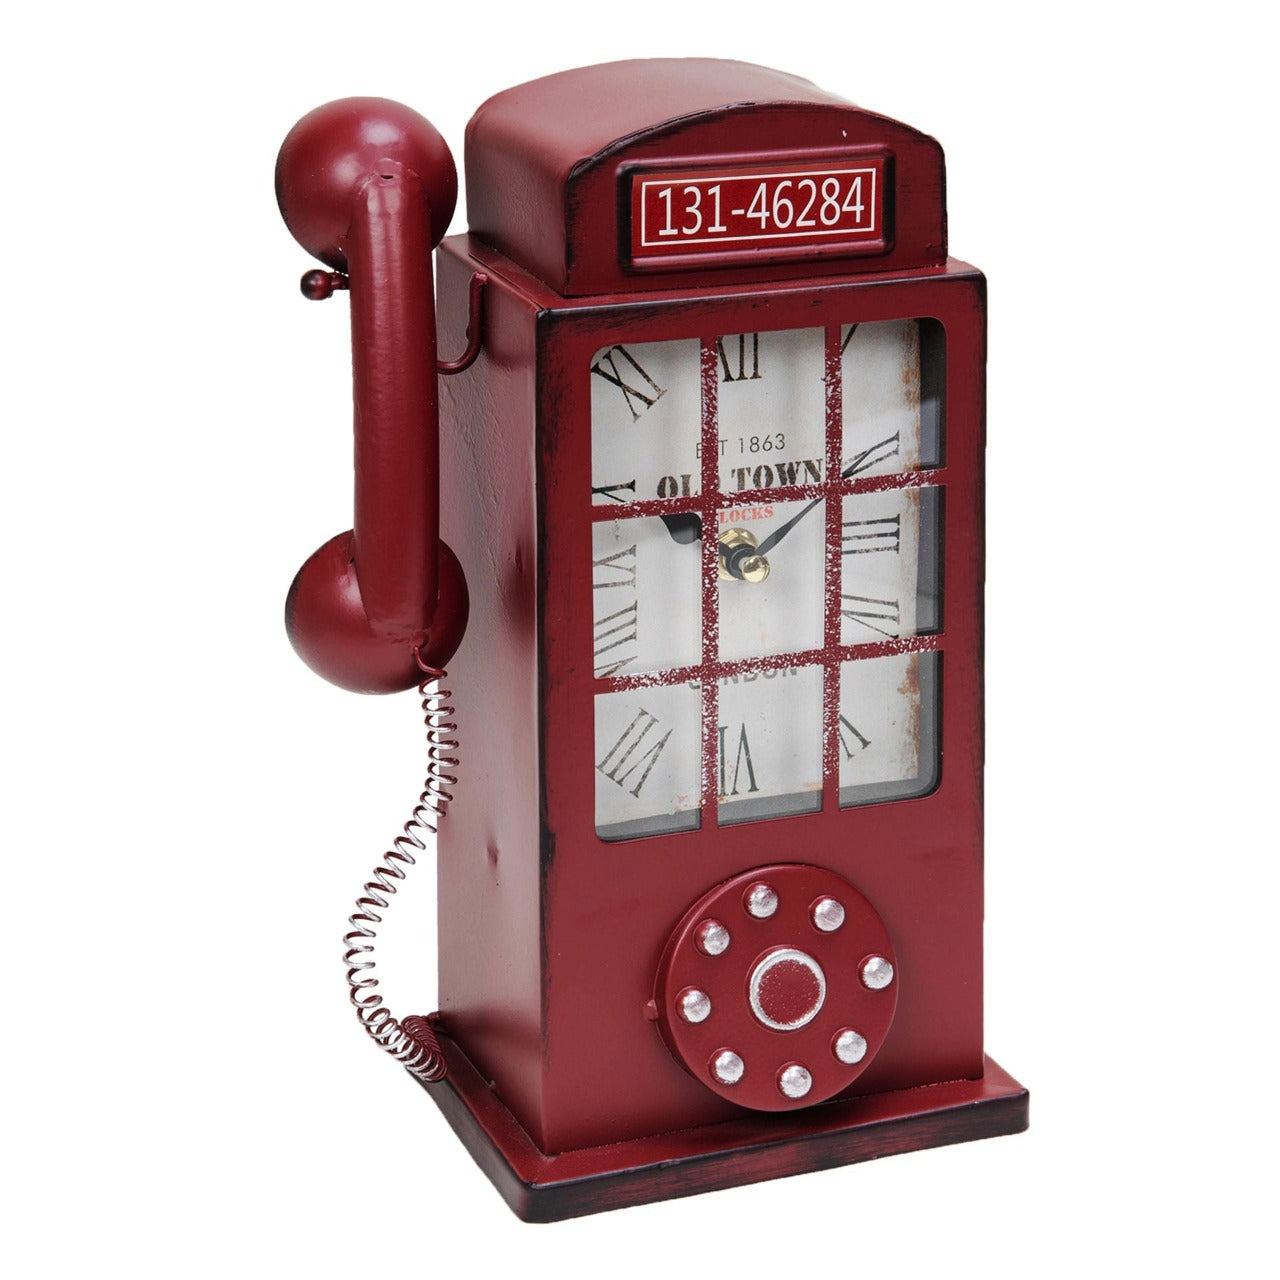 Hometime Mantel Clock Red Telephone Clock  A stylish, retro red telephone mantel clock. From HOMETIME® - unbeatable style and astonishing affordability in contemporary timekeeping.